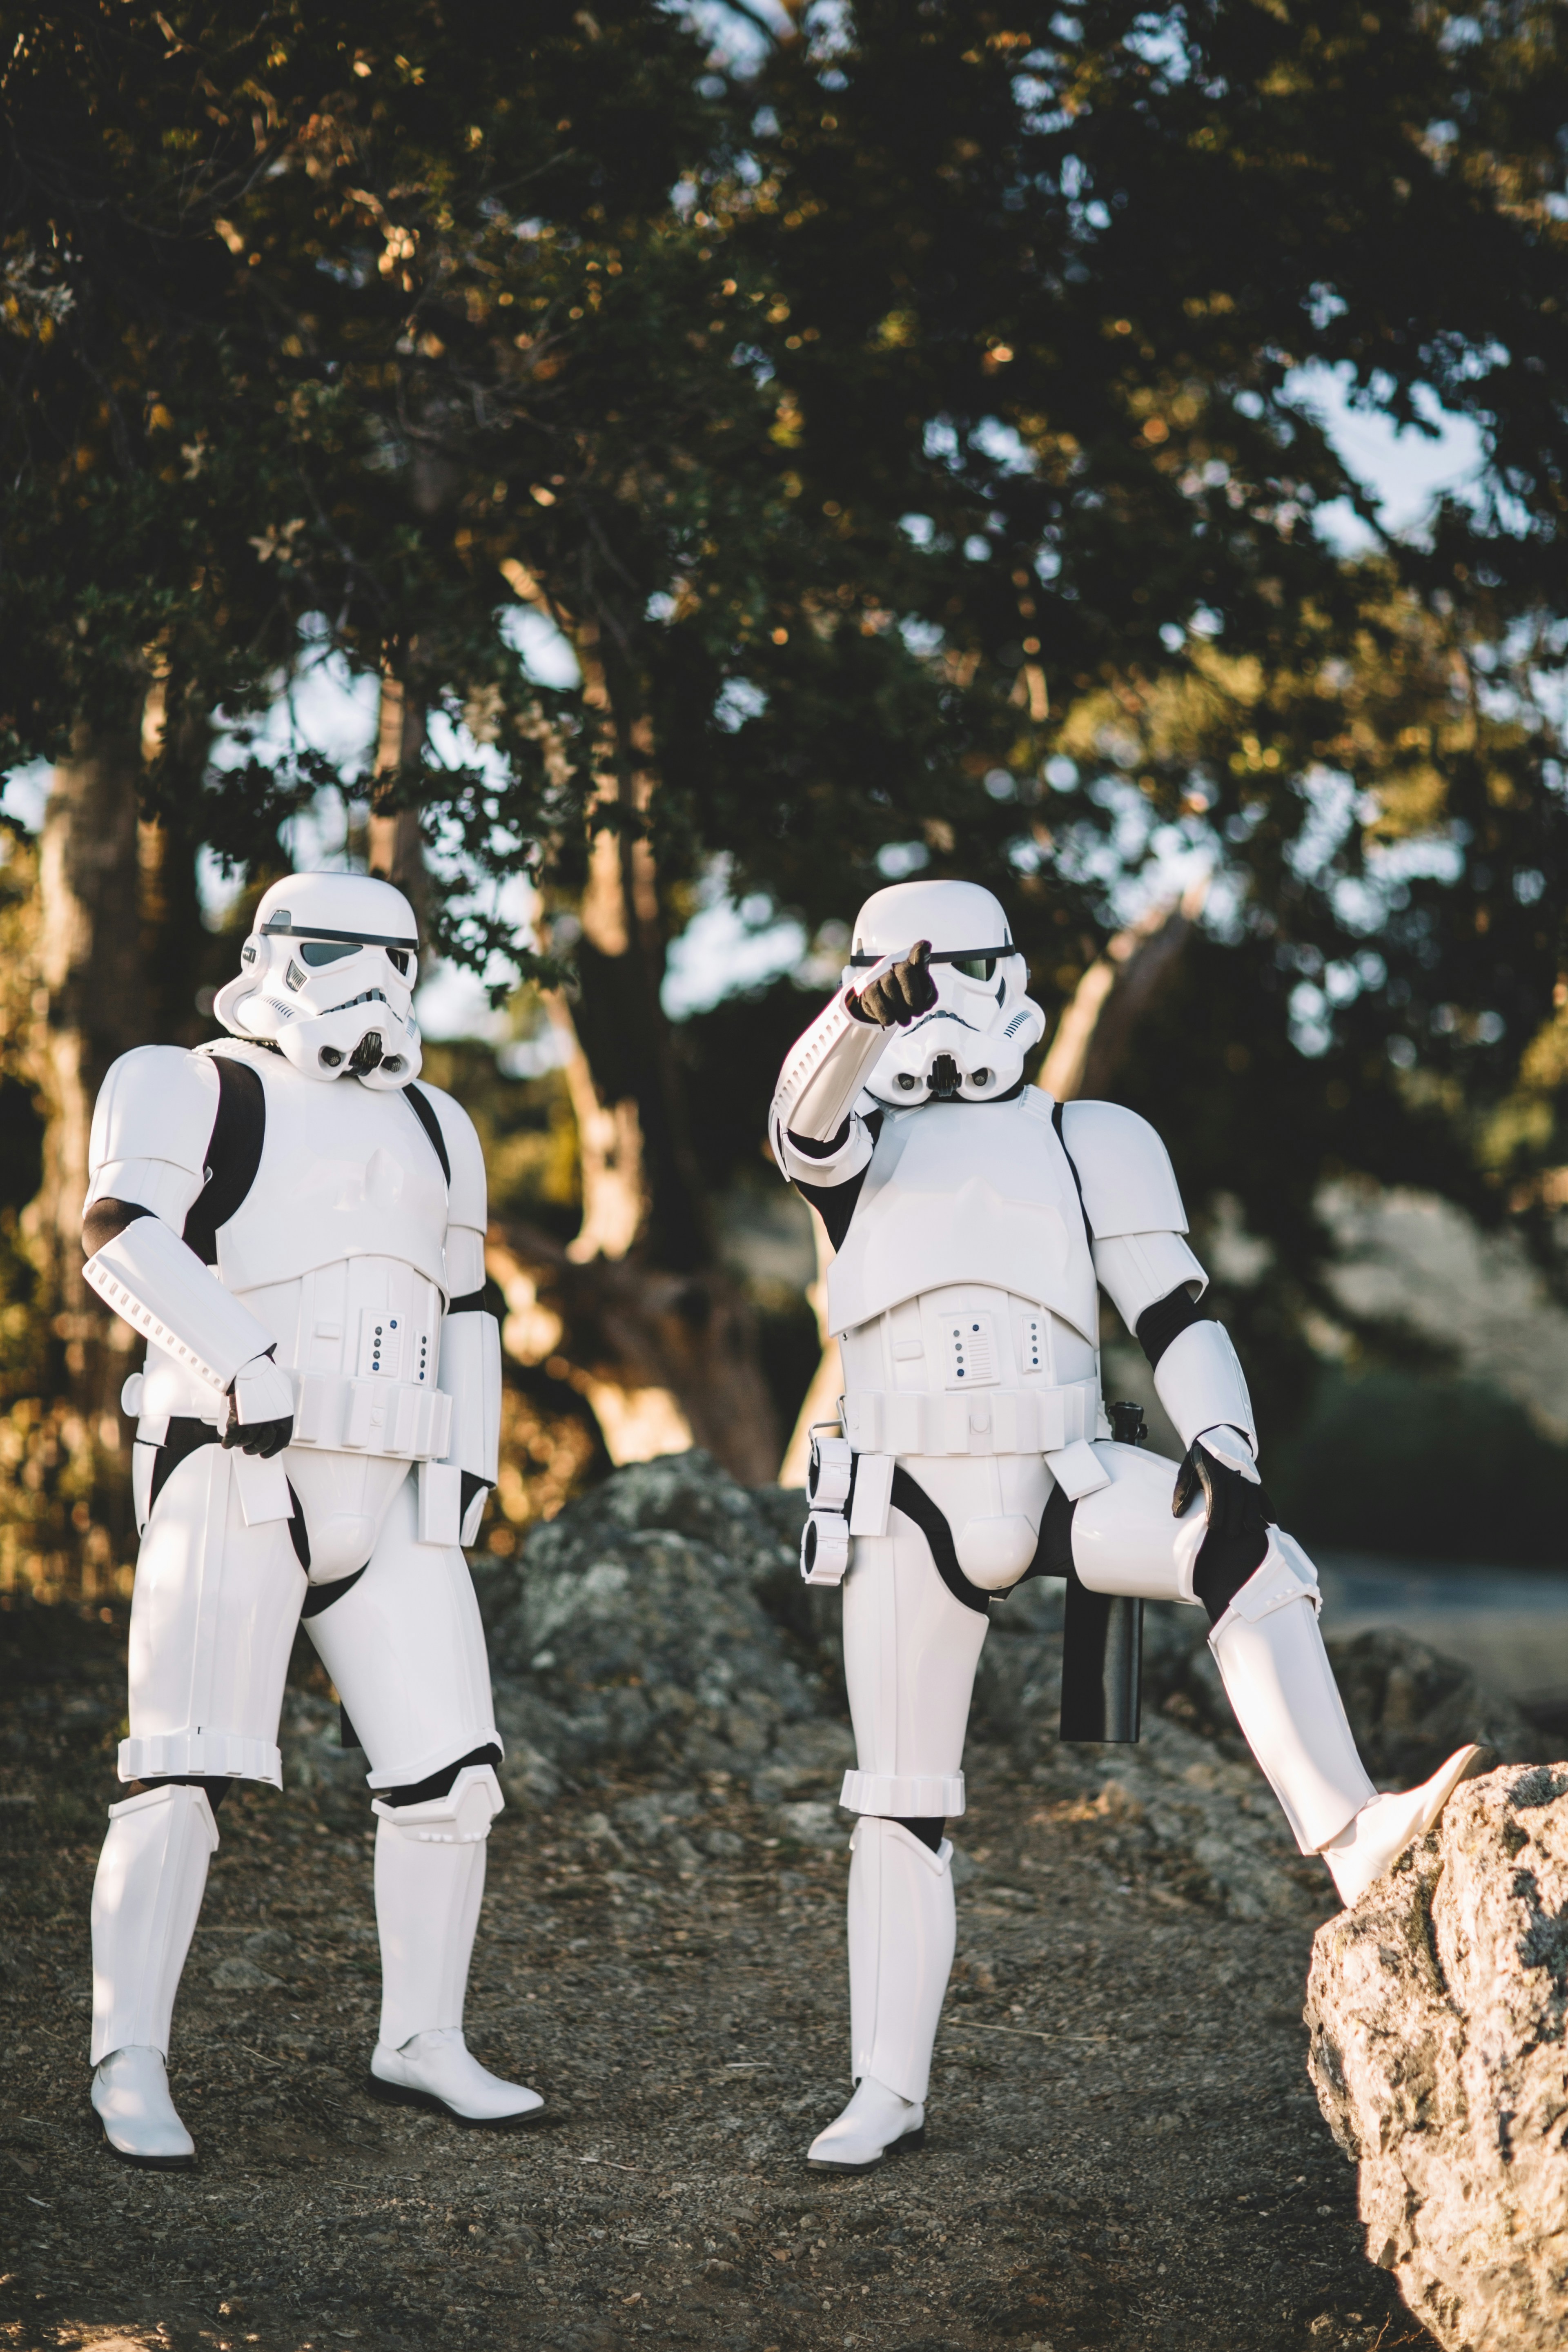 Two Stormtroopers posing